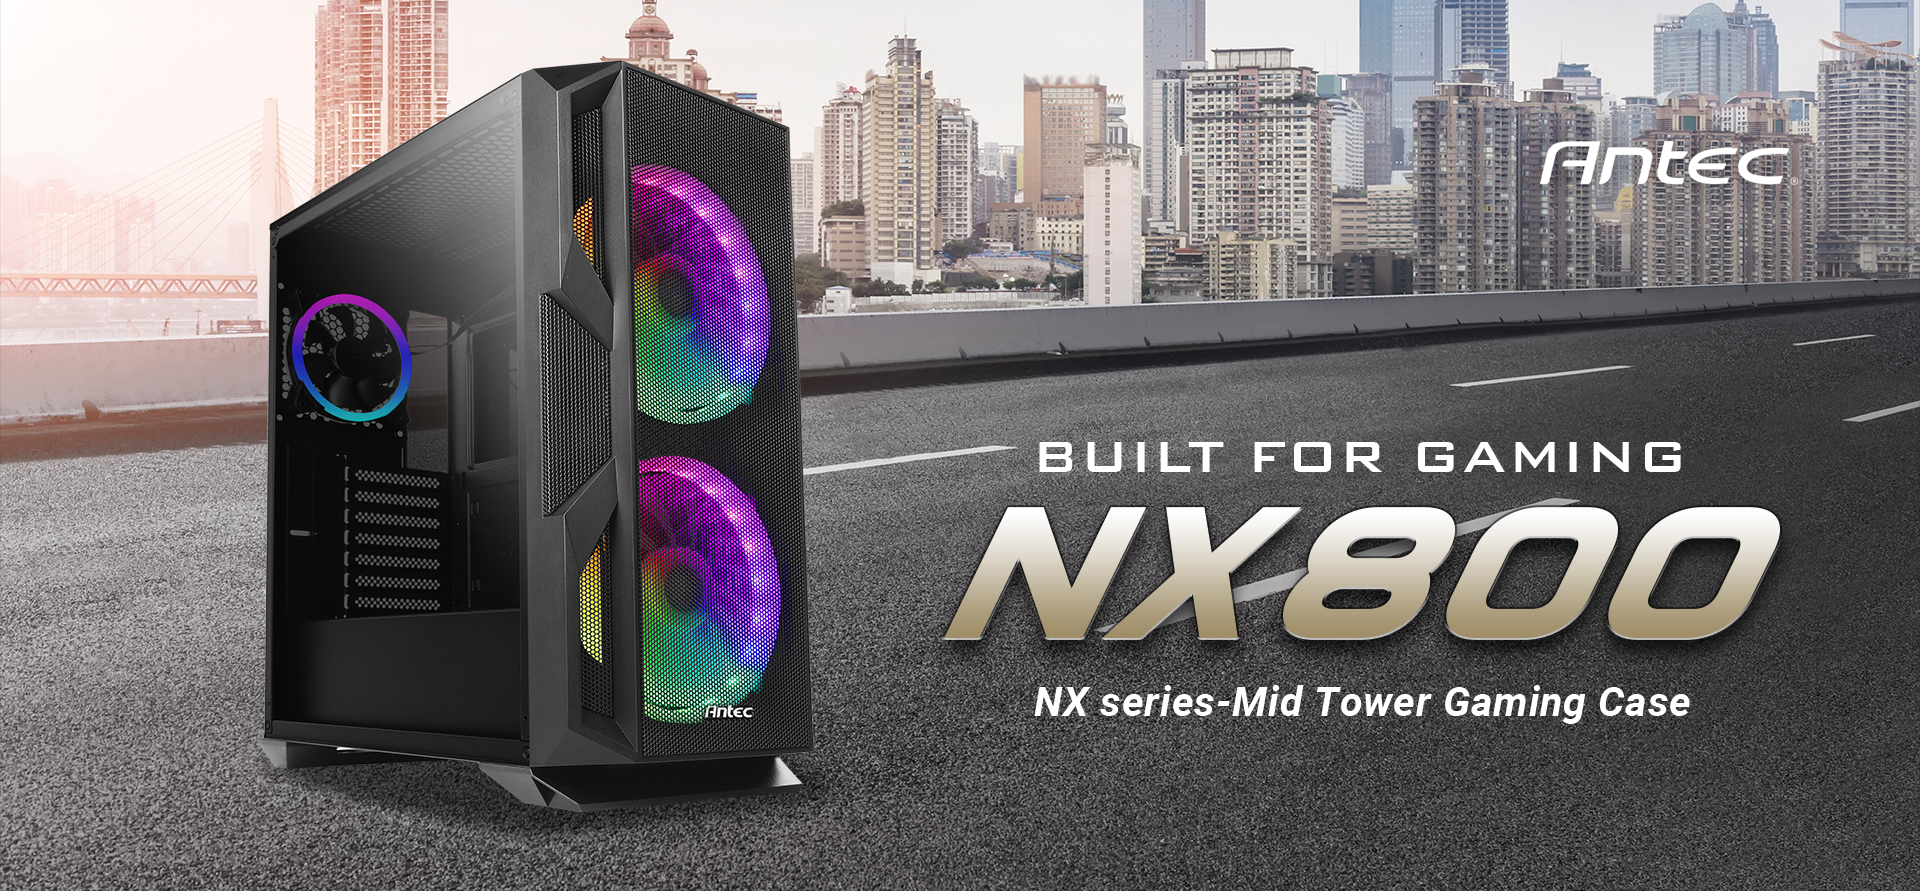 Antec logo and Antec NX800 MX series-Mid Tower Gaming Case side view